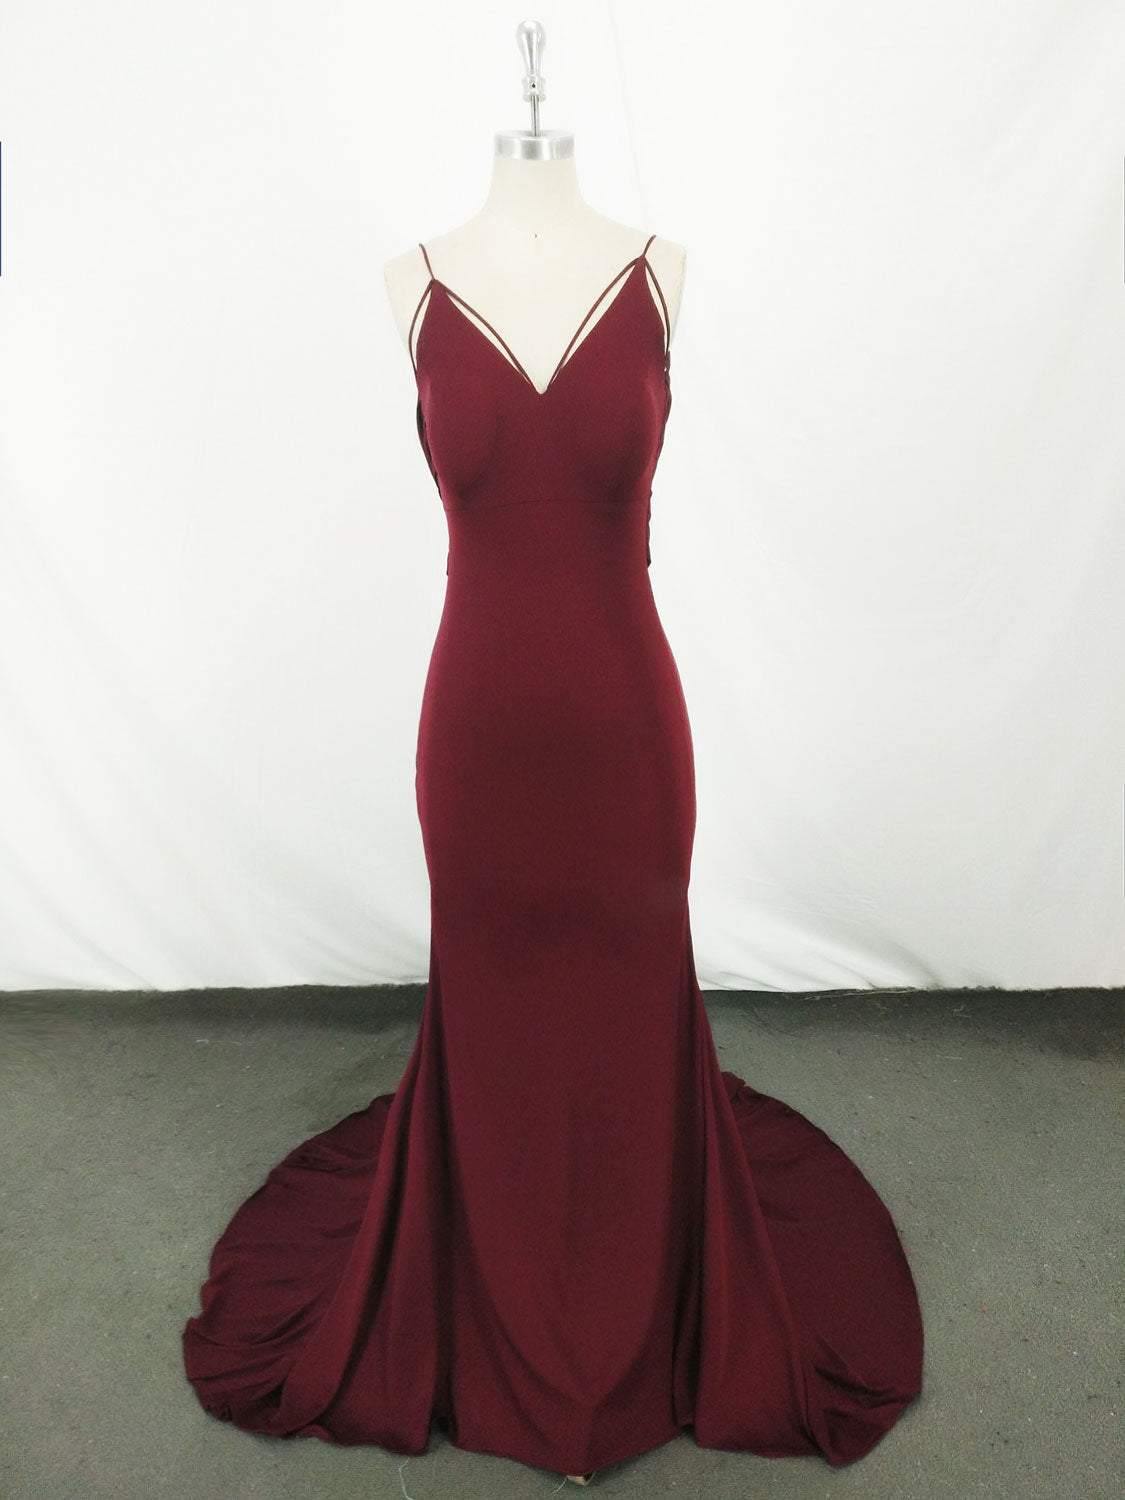 Simple Burgundy Mermaid Long Prom Dress Outfits For Girls, Burgundy Evening Dress